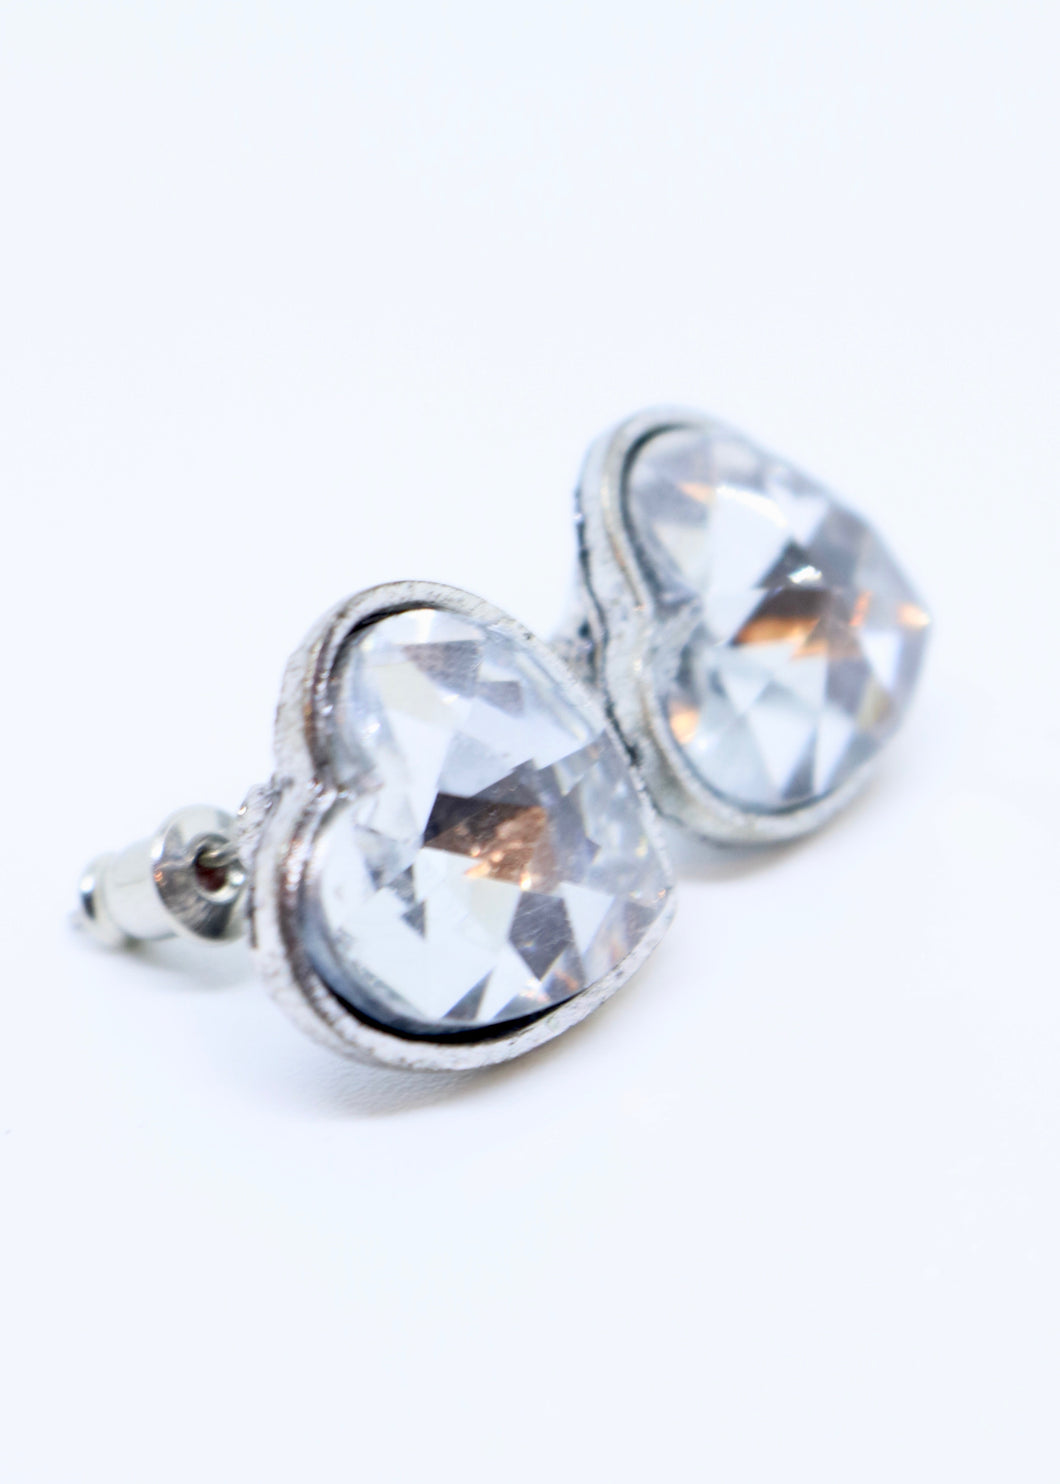 Limited Edition Heart Shaped Stone Earrings Silver Coloured - By Feathers Of Italy - Feathers Of Italy 